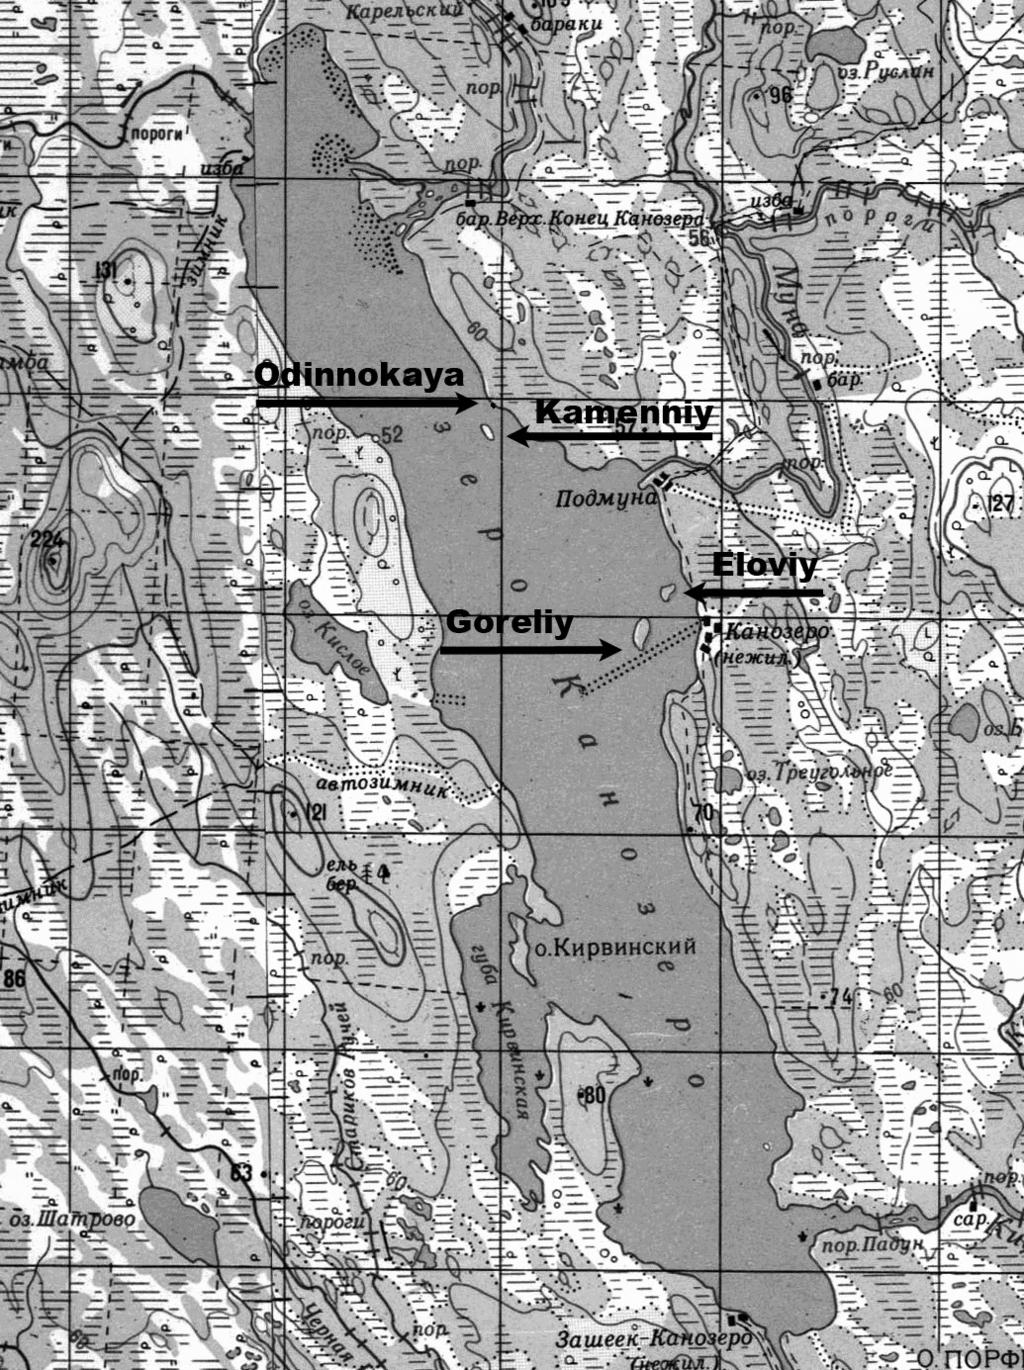 Fig. 2. Lake Kanozero and localities of rock carvings. (Kamenniy-7; Figs. 16-21) consists of more than 430 figures.